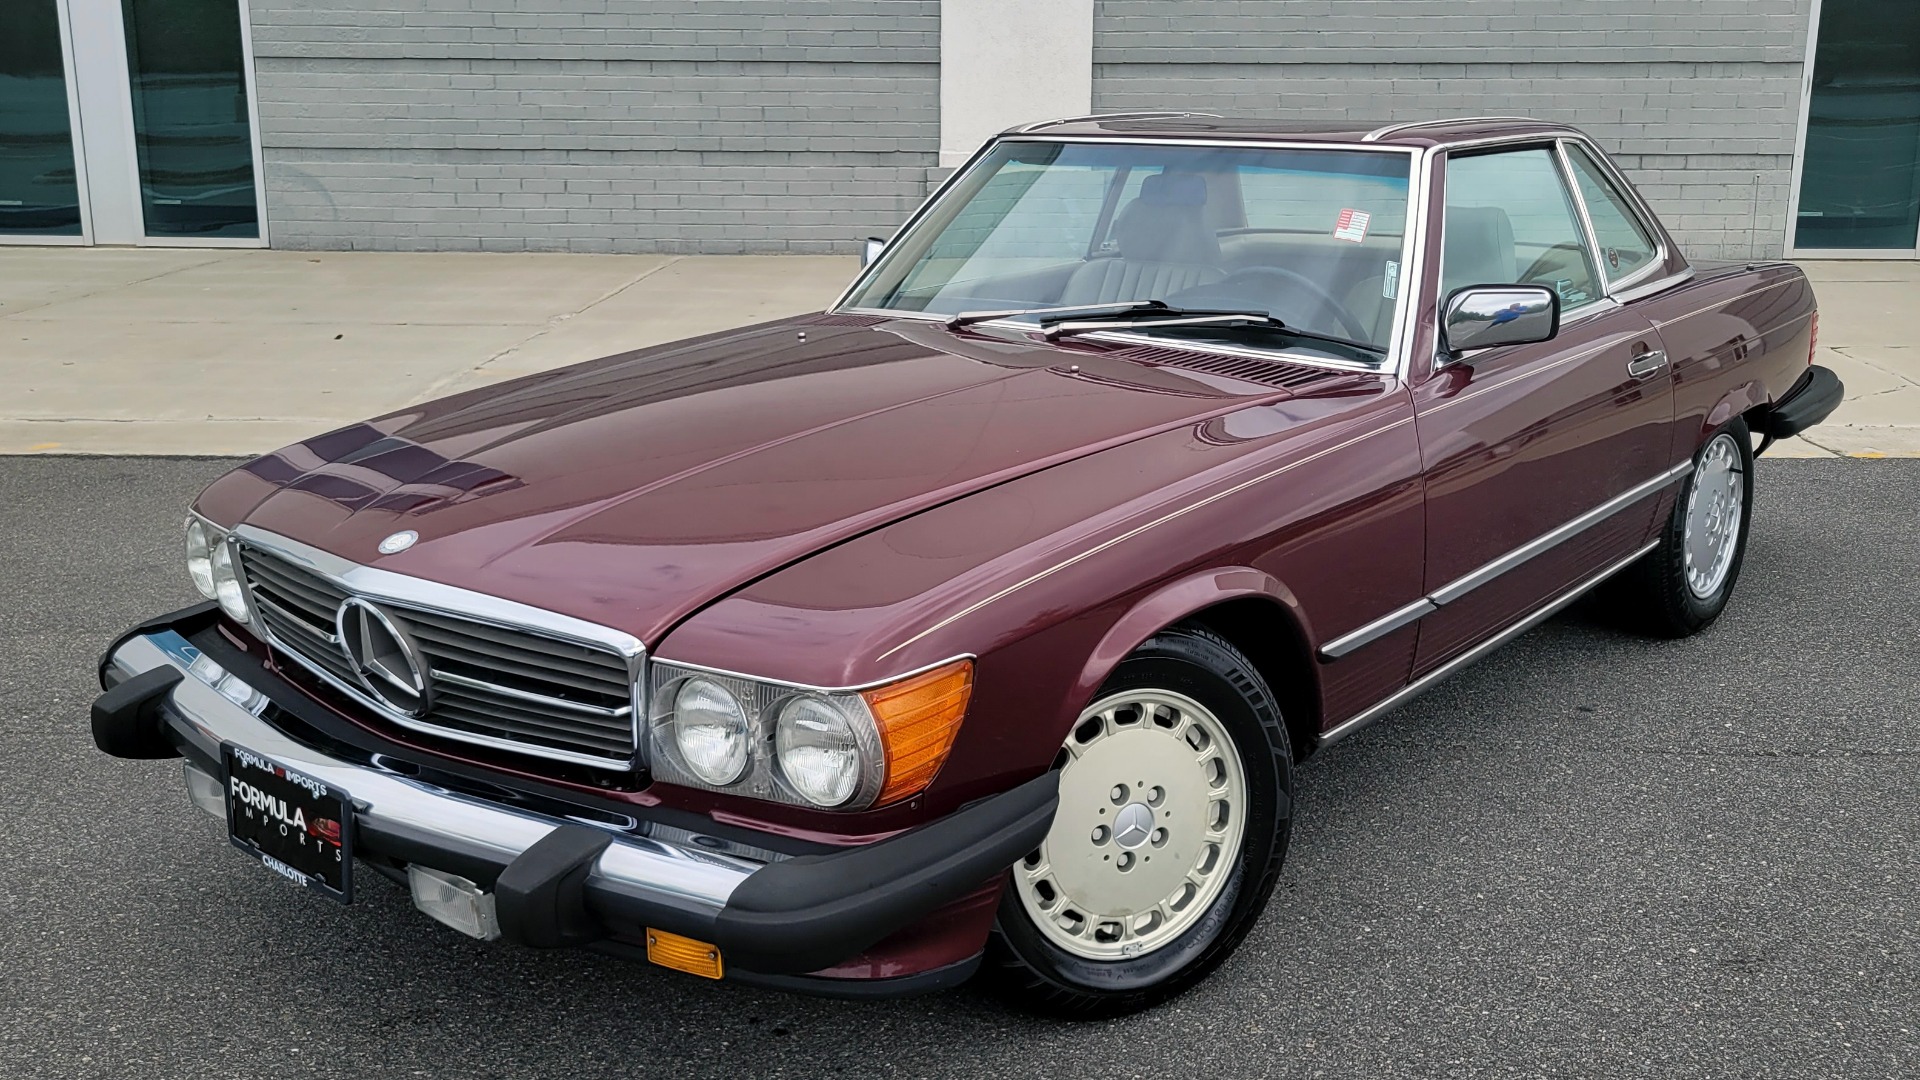 Used 1987 Mercedes-Benz 560 SERIES 560SL ROADSTER / 5.6L V8 / AUTO / LEATHER / ALPINE for sale $16,700 at Formula Imports in Charlotte NC 28227 4